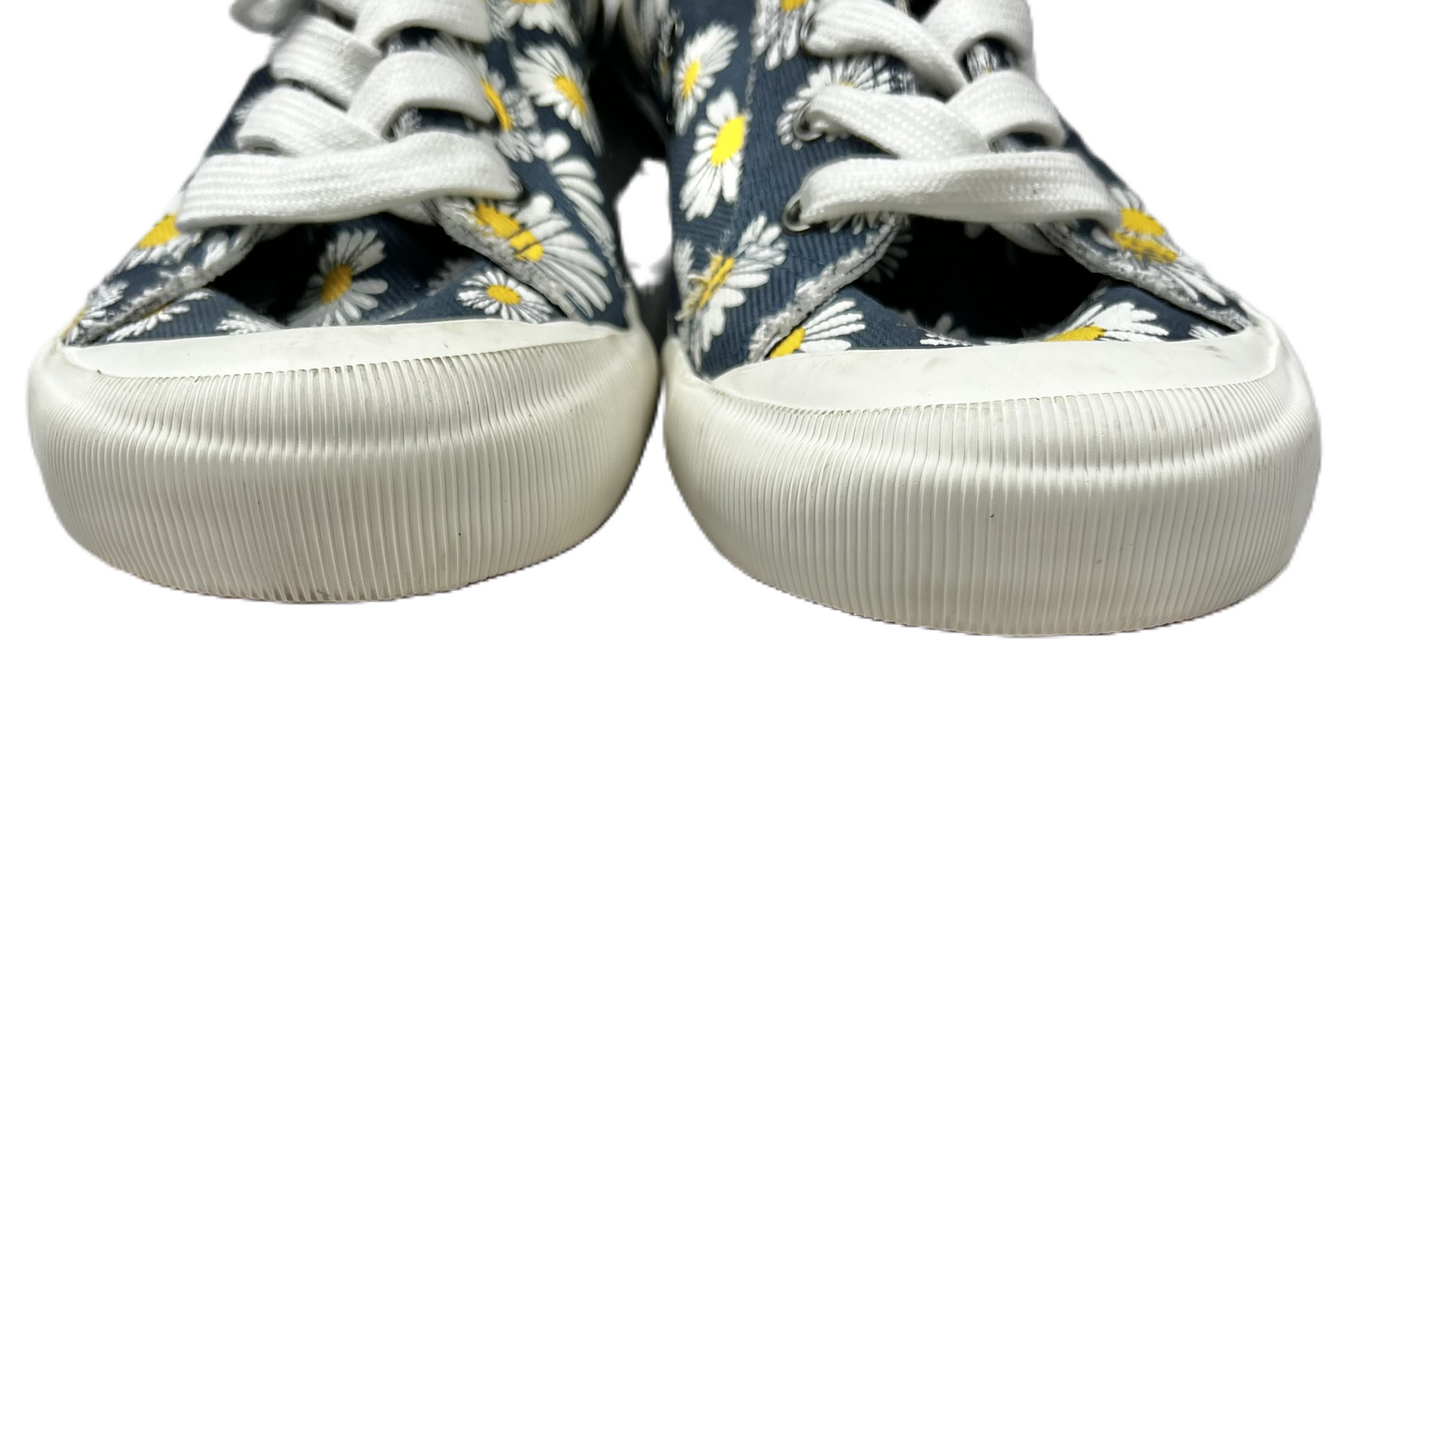 Flowered Shoes Sneakers By Rocket Dogs, Size: 8.5